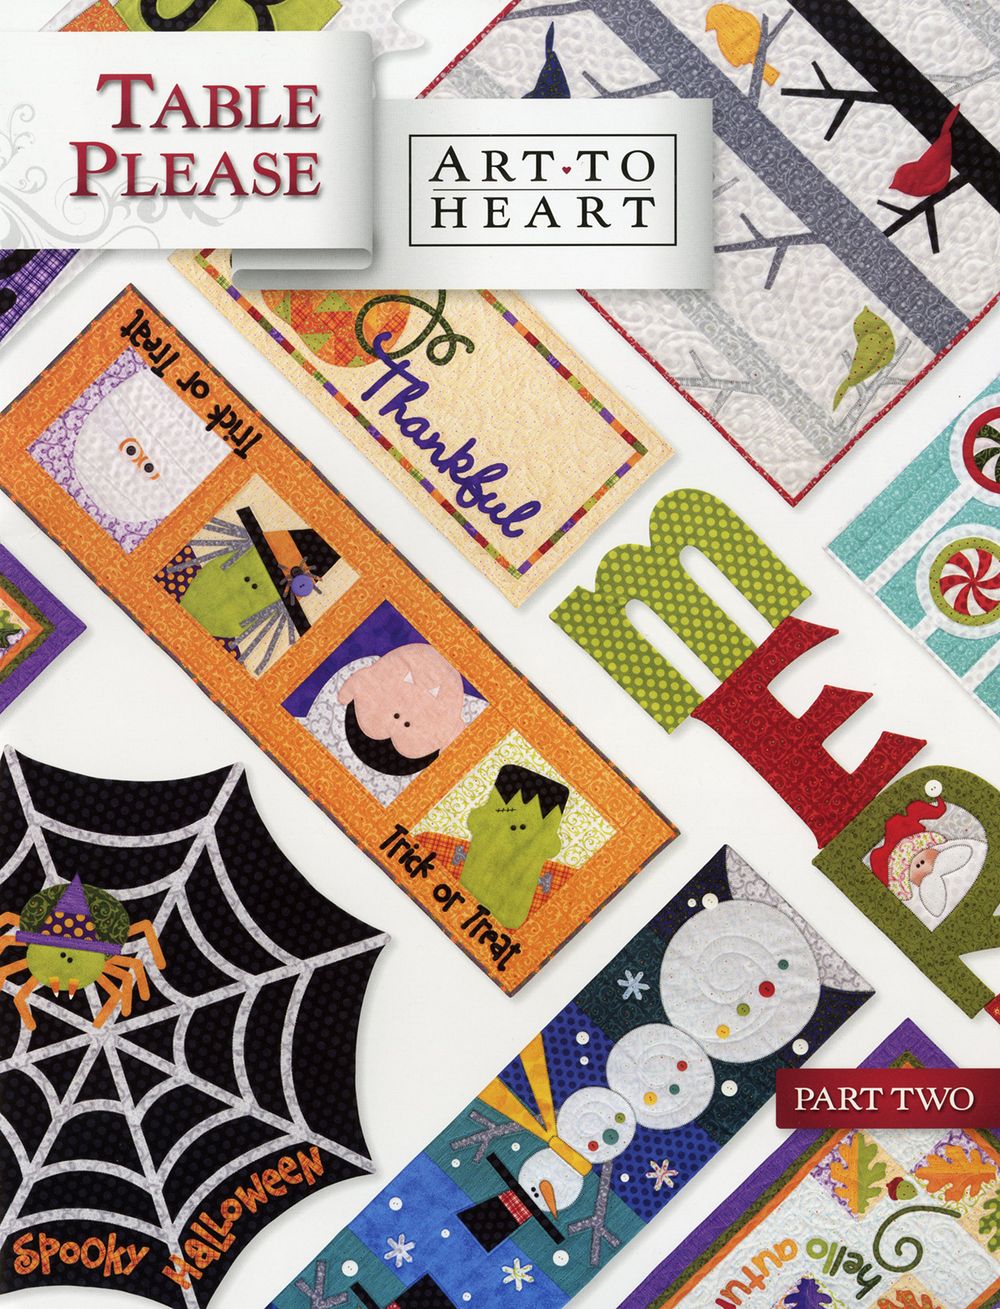 Table Please Part Two Quilt Pattern Book by Nancy Halvorsen of Art to Heart